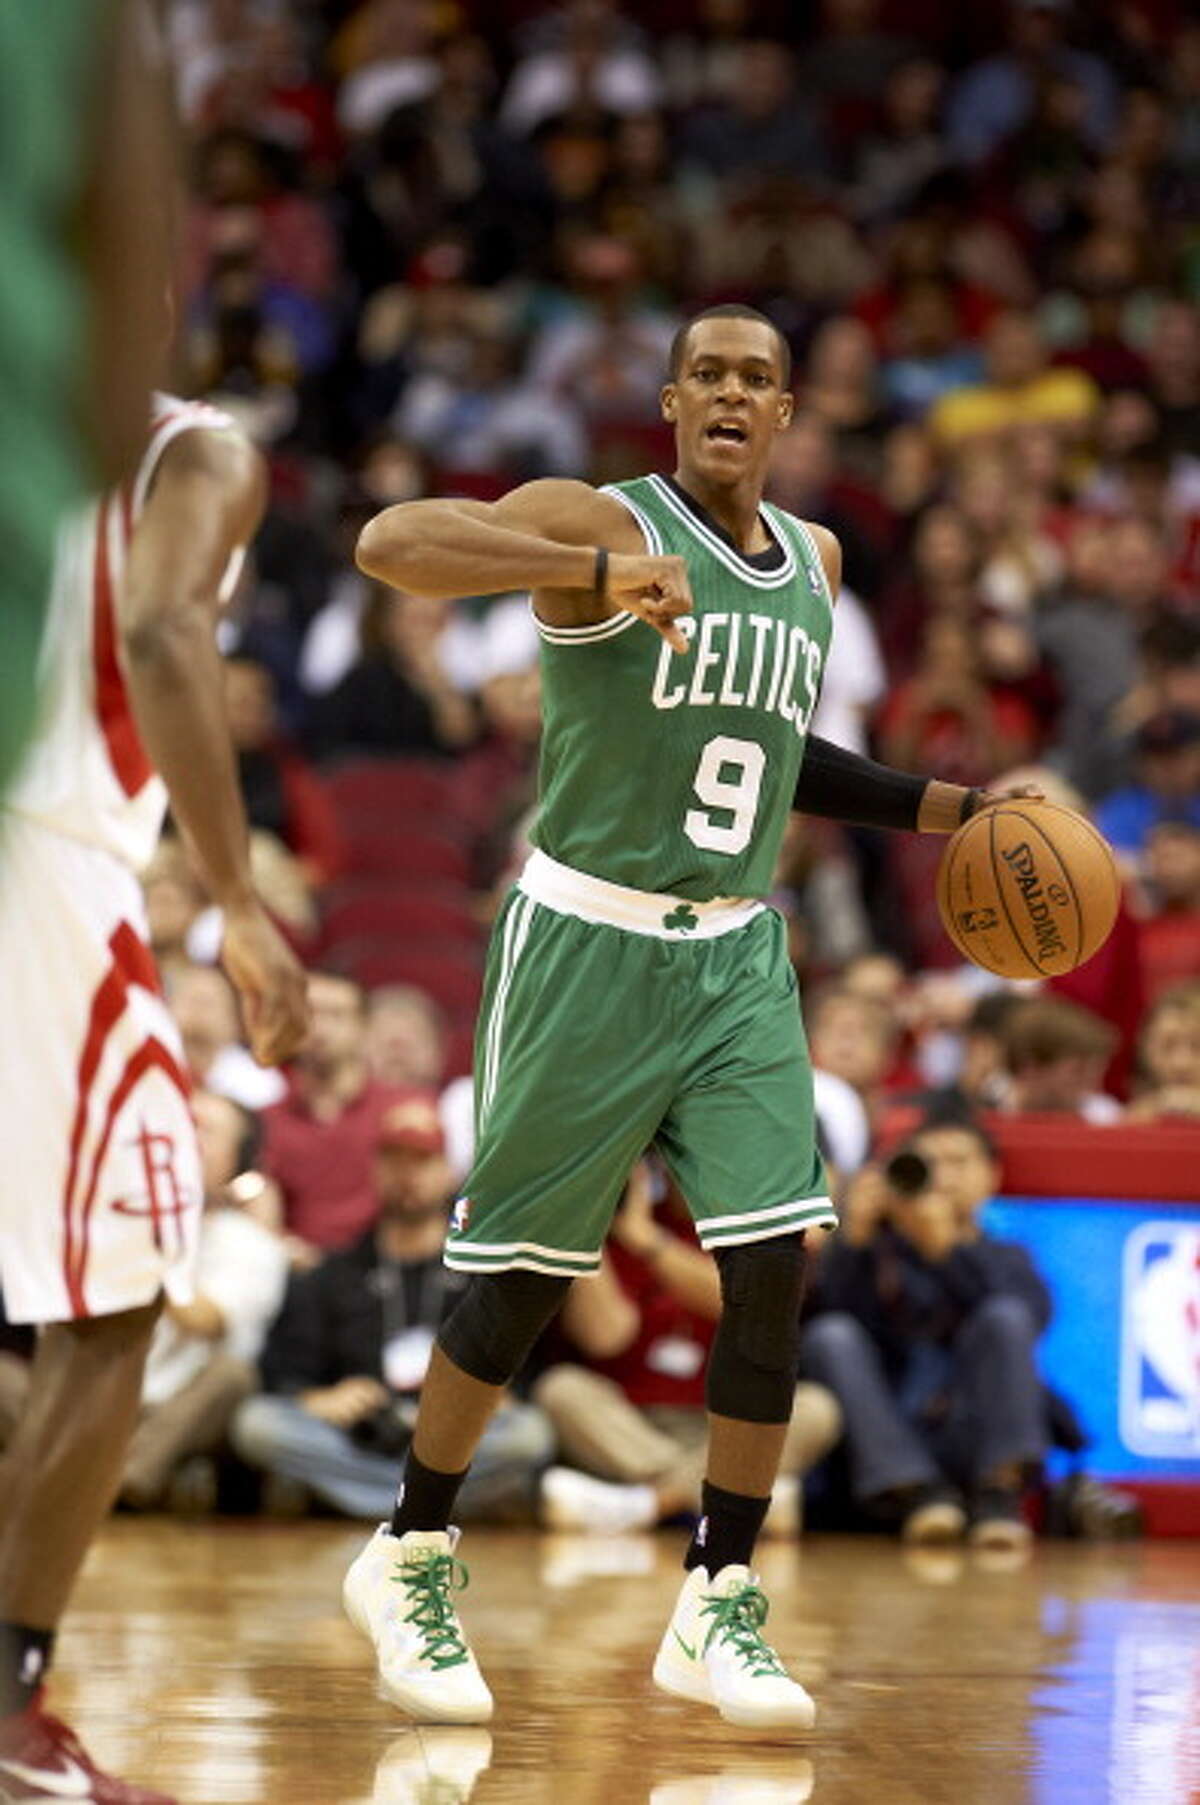 Nov. 1 vs. Celtics 7 p.m. TV: CSN In their first game at Toyota Center, the Rockets welcome Rajon Rondo and the rebuilding Celtics to town.